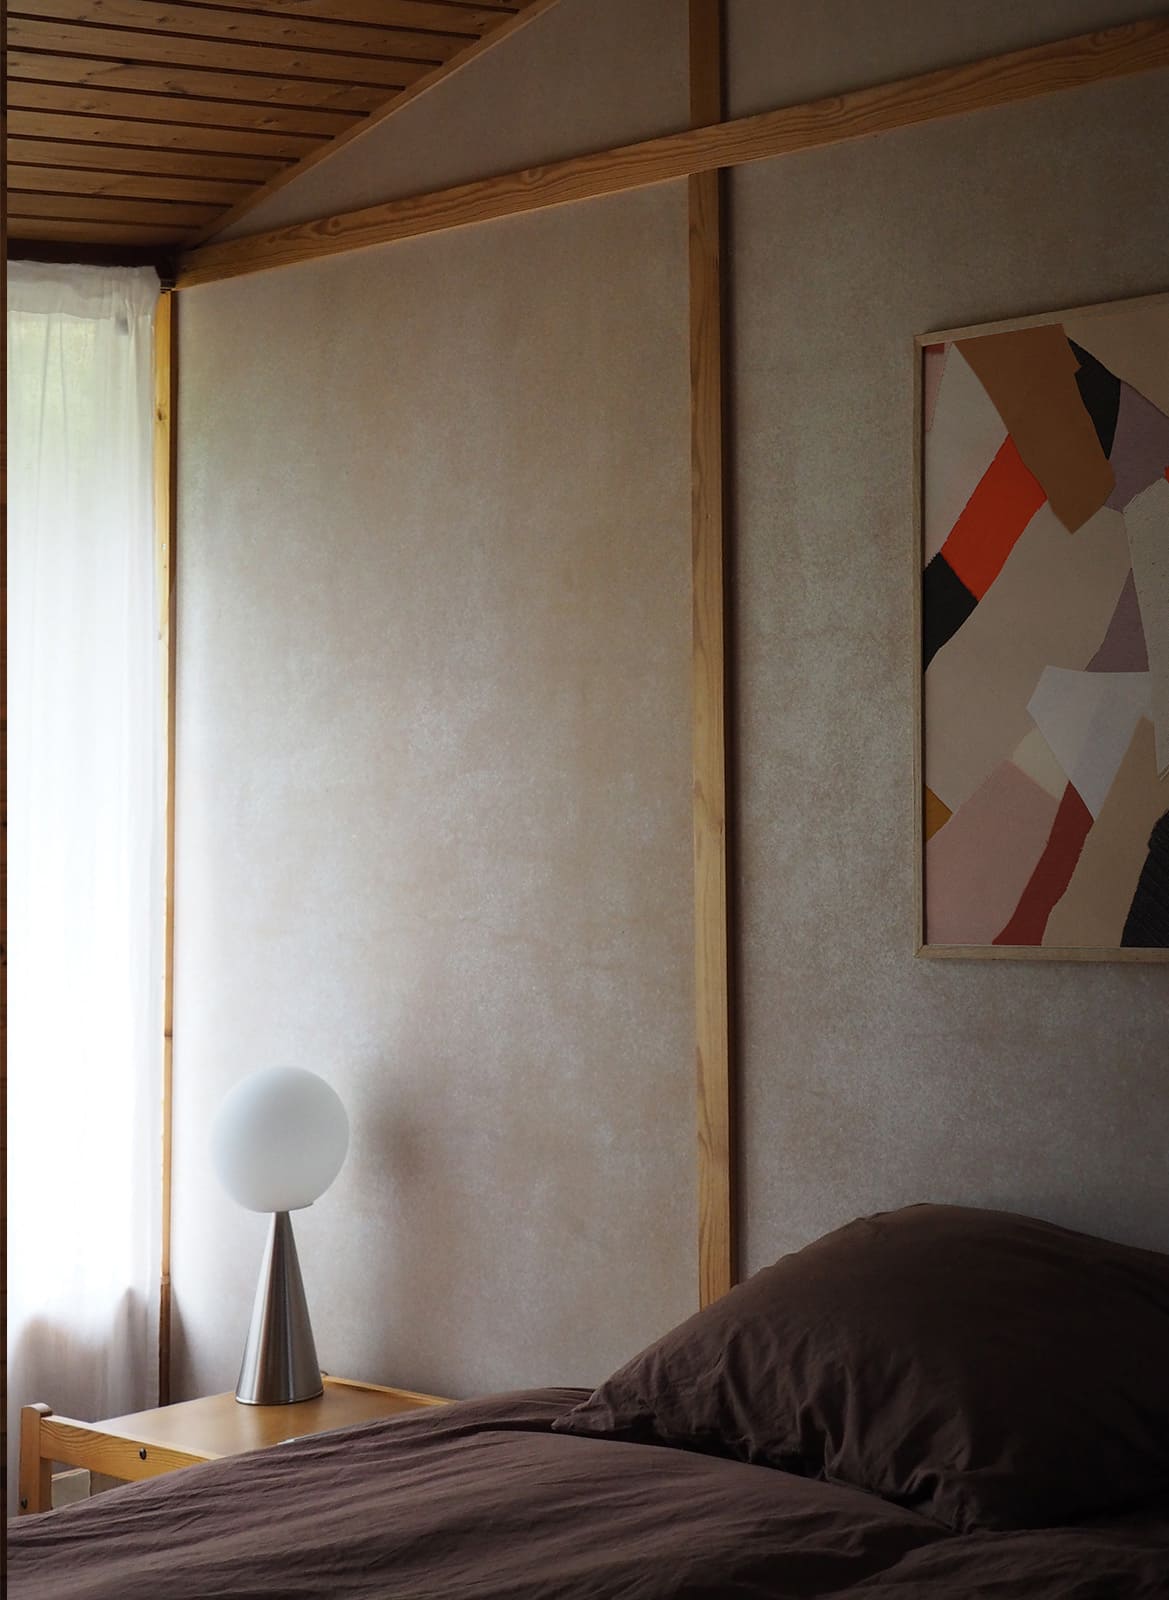  Framed colorful poster hanging above a bed by Atelier Cph